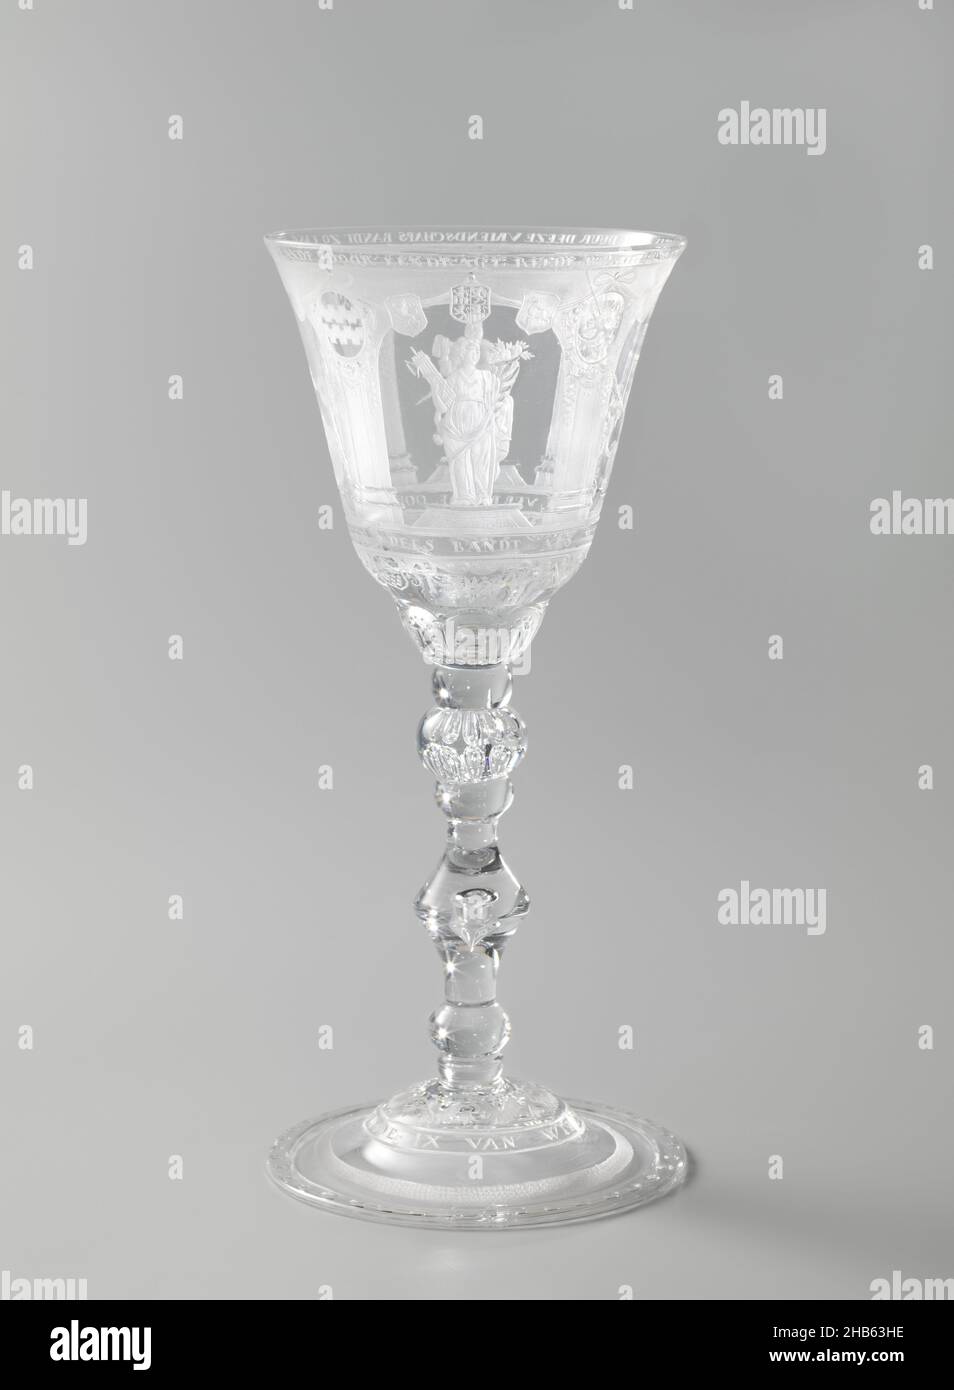 Wine glass, Hens cup of the Society The Ninths, Glass goblet decorated in carving. The base is trumpet-shaped, strongly hollowed in the center. The stem is composed of four smooth nodi between which is a lacy piece with one bubble and a thick nodus with two rows of bubbles. The chalice is conical with two curves at the bottom. The carving of the chalice: row of four arches with a figure standing on a pedestal. Man with fasces in left and horn of plenty in right hand. Crowned figure with sword in left hand and reins of lion behind him in right hand. Bearded man with heart in left hand and book Stock Photo